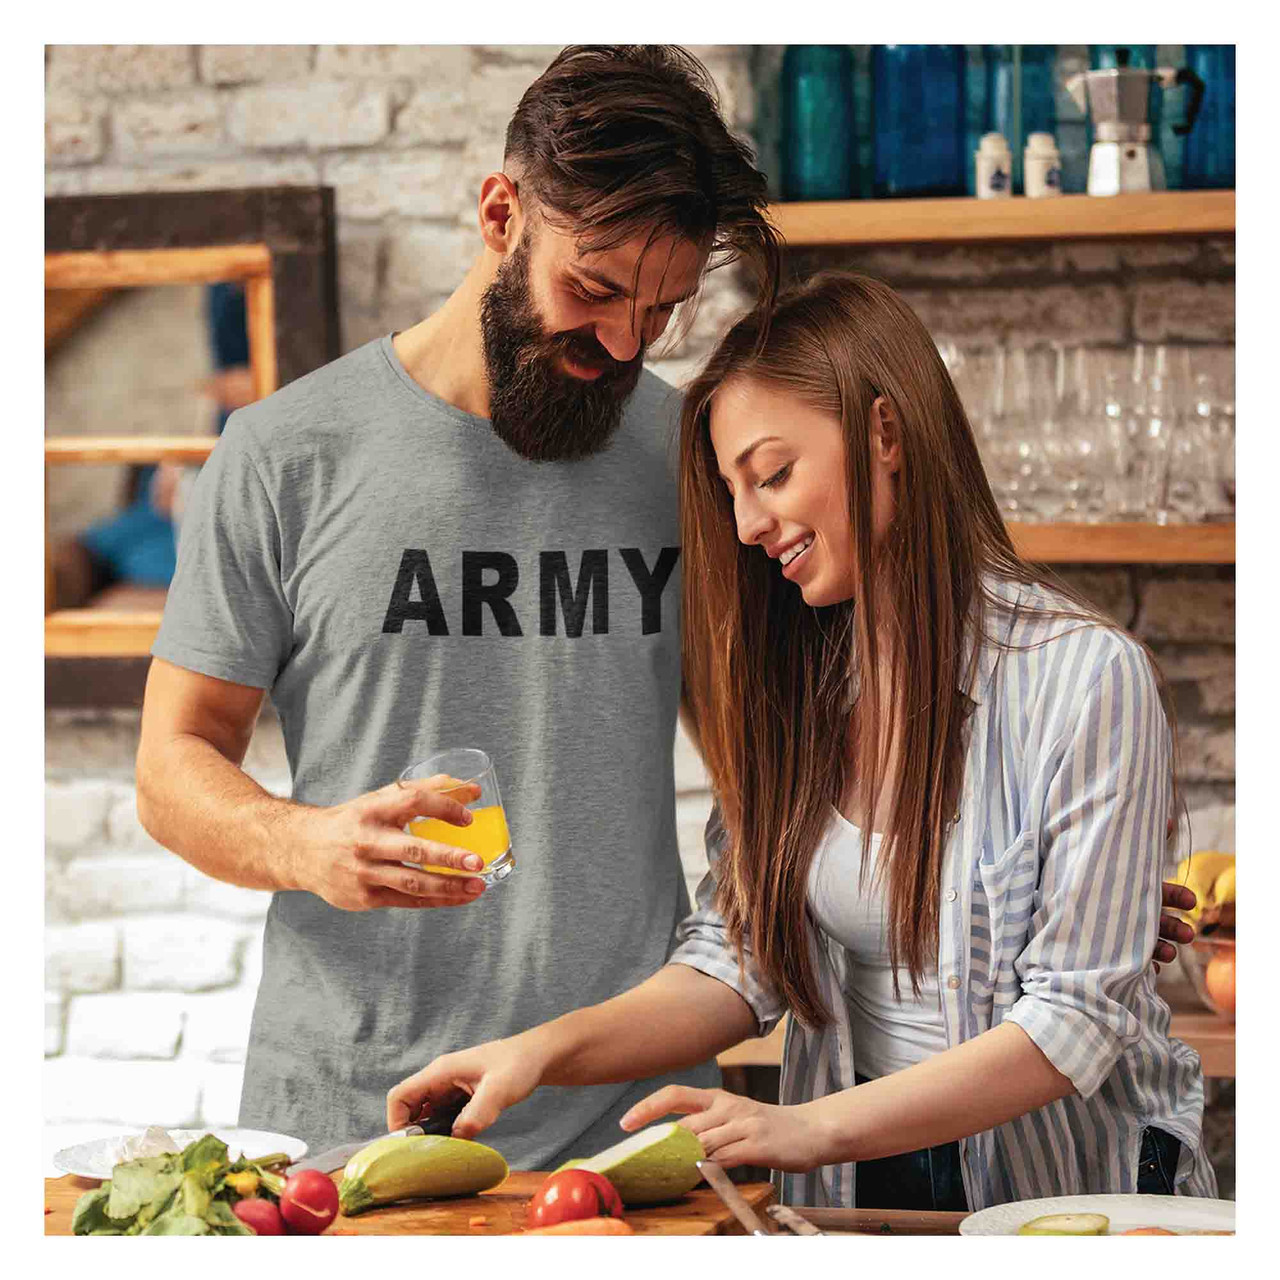 US Army Olive Drab T-Shirt Officially Licensed | VetFriends